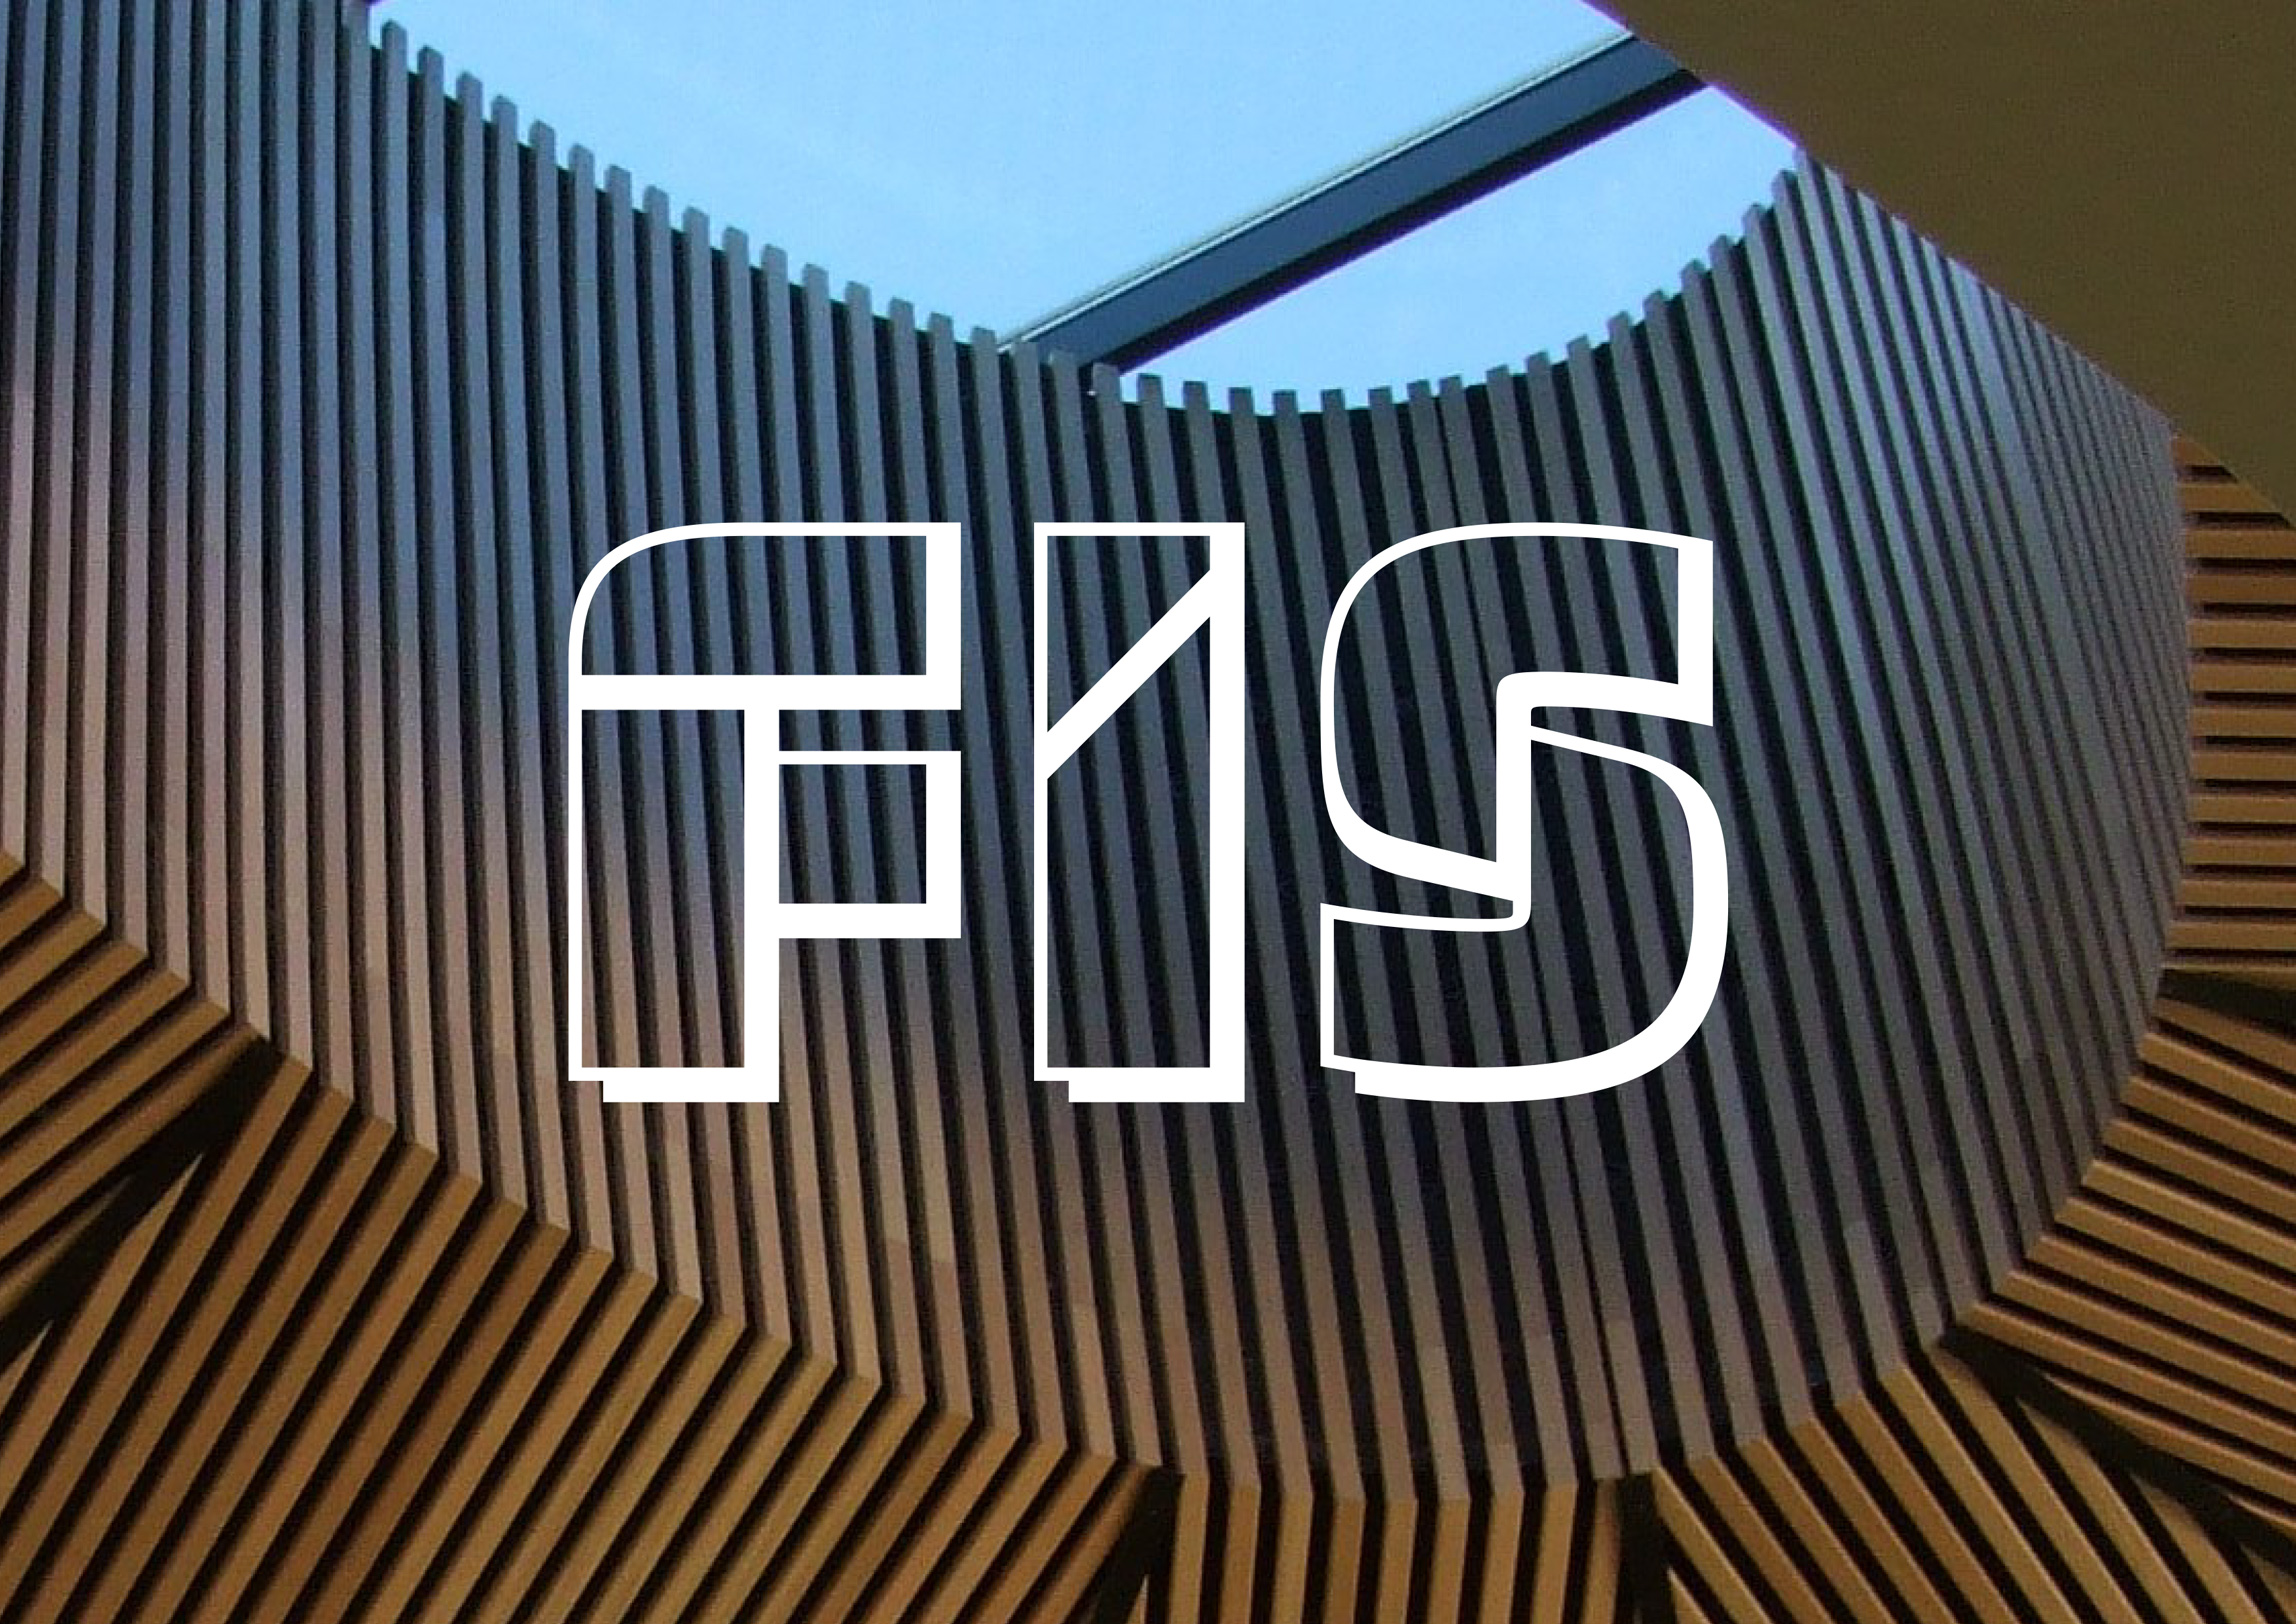 FIS finishes and interiors sector rebrand imagery